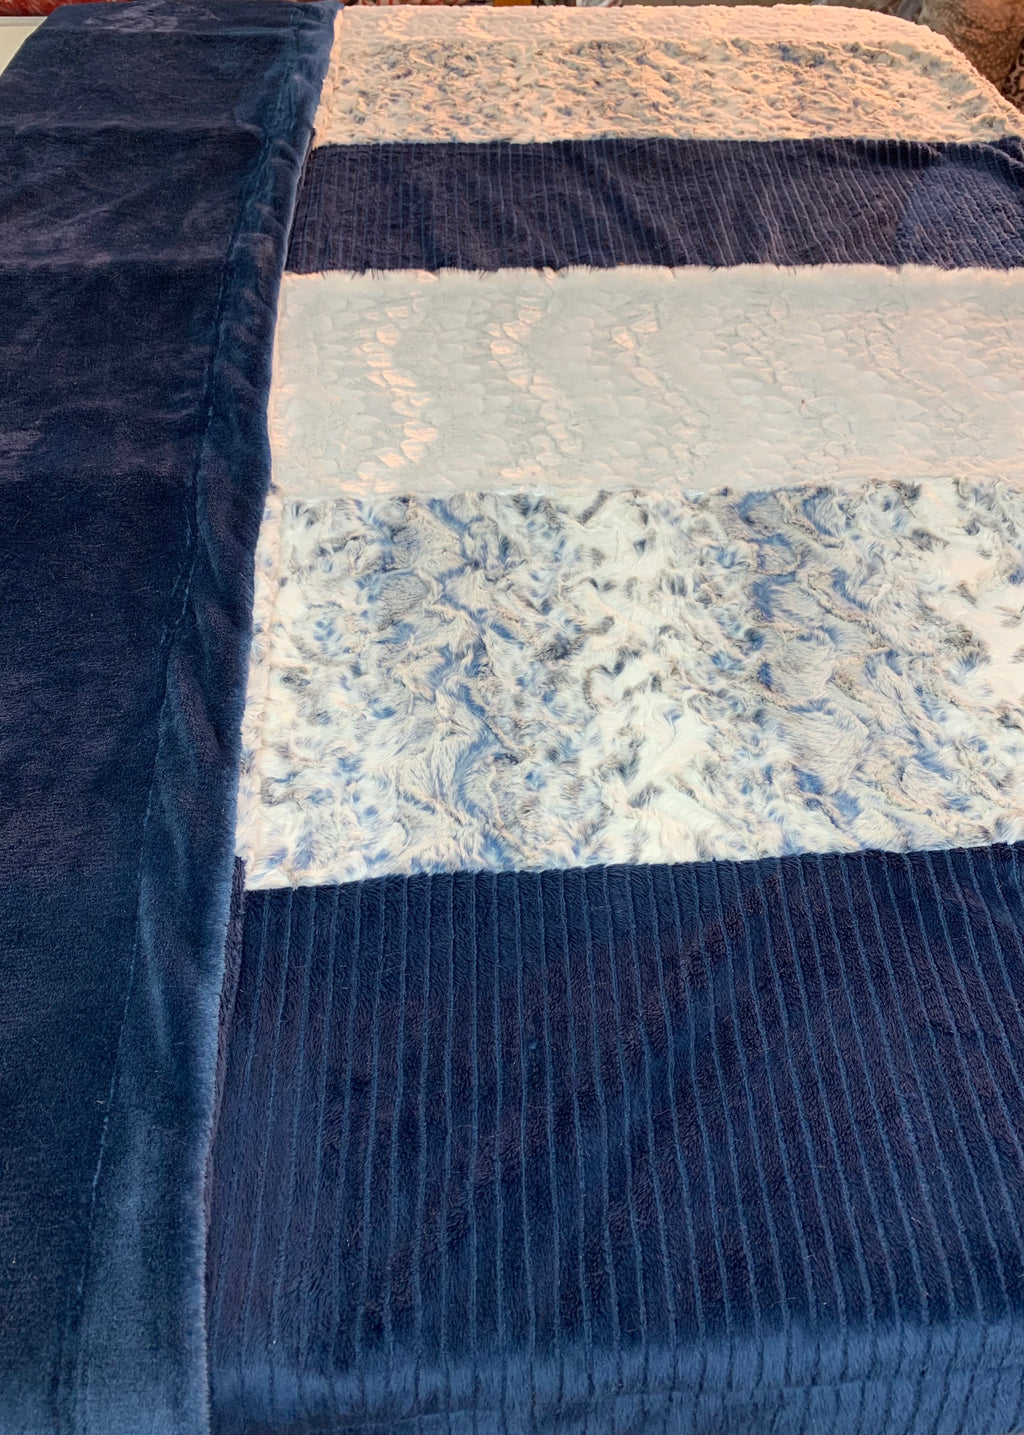 Navy & White Cuddle Quilt Blanket with Minky Cuddle Backing